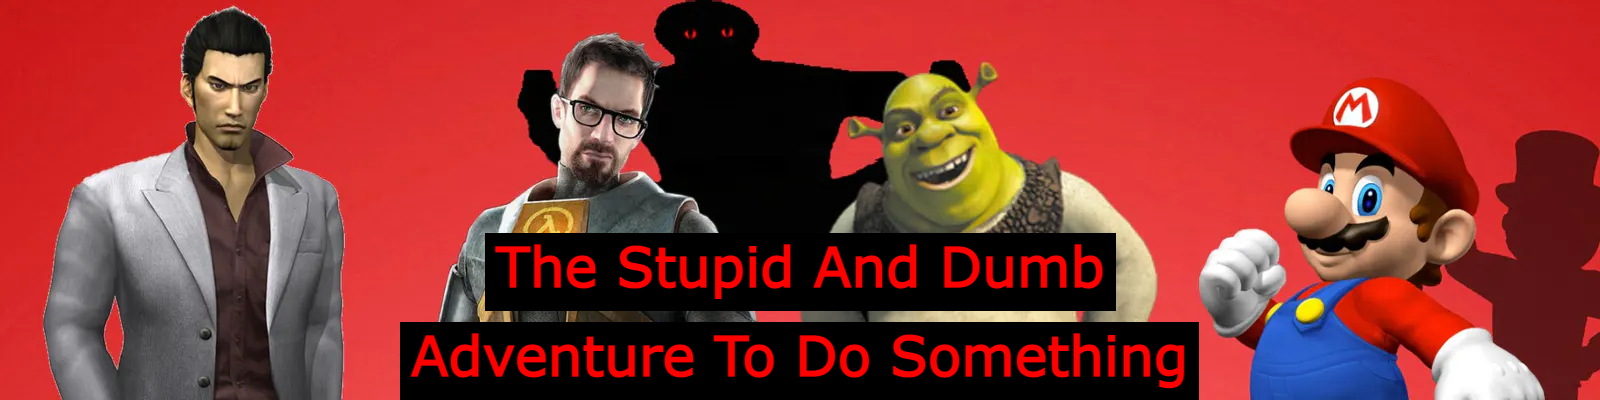 The Stupid And Dumb Adventure To Do Something